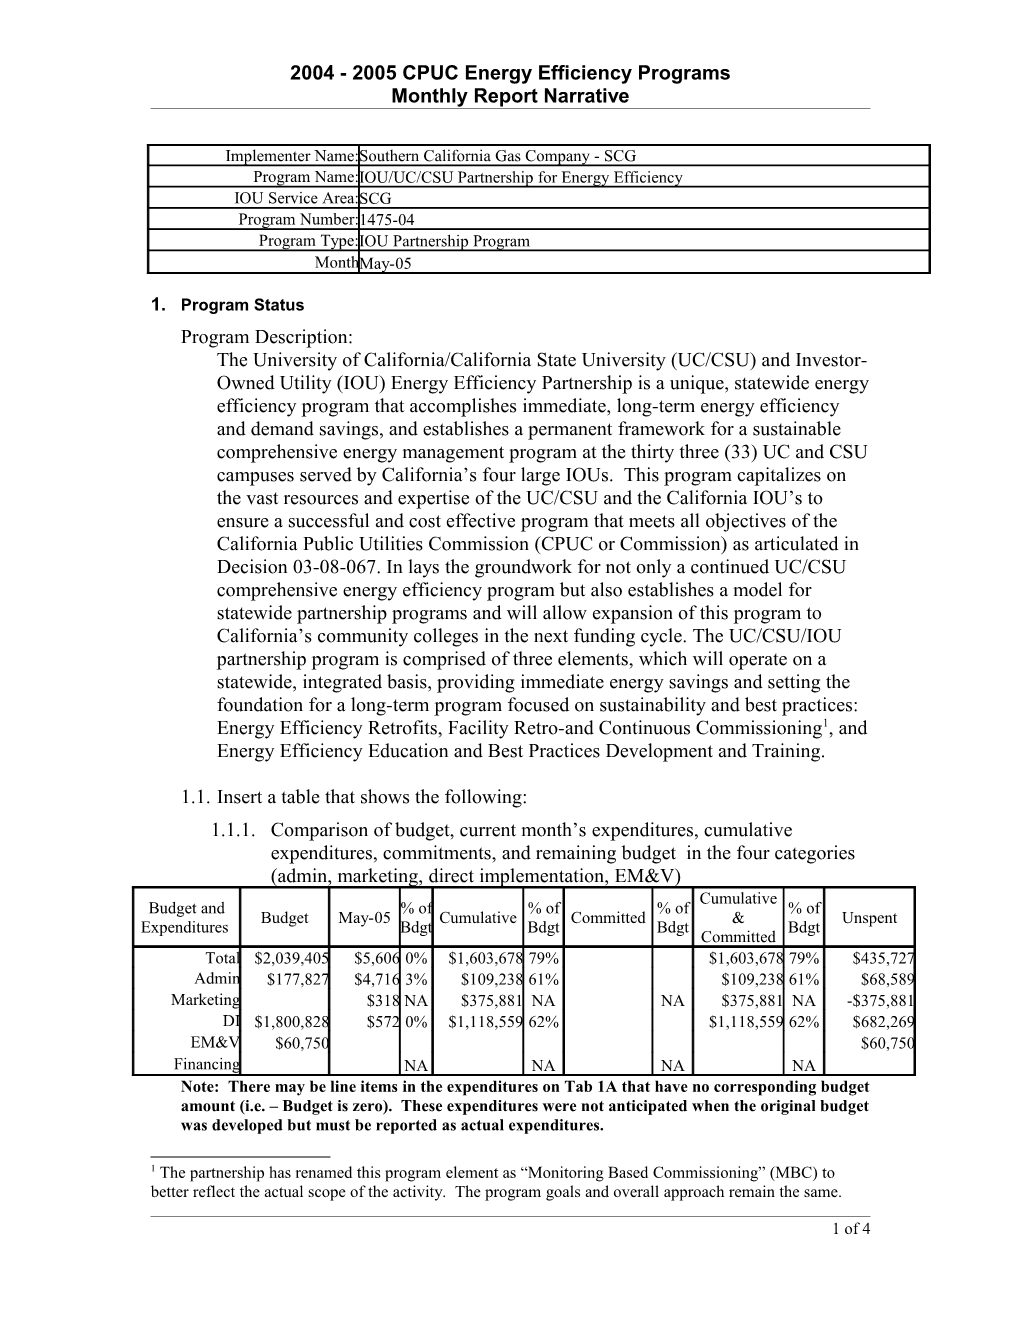 PY 2002 Energy Efficiency Reporting Requirements s1